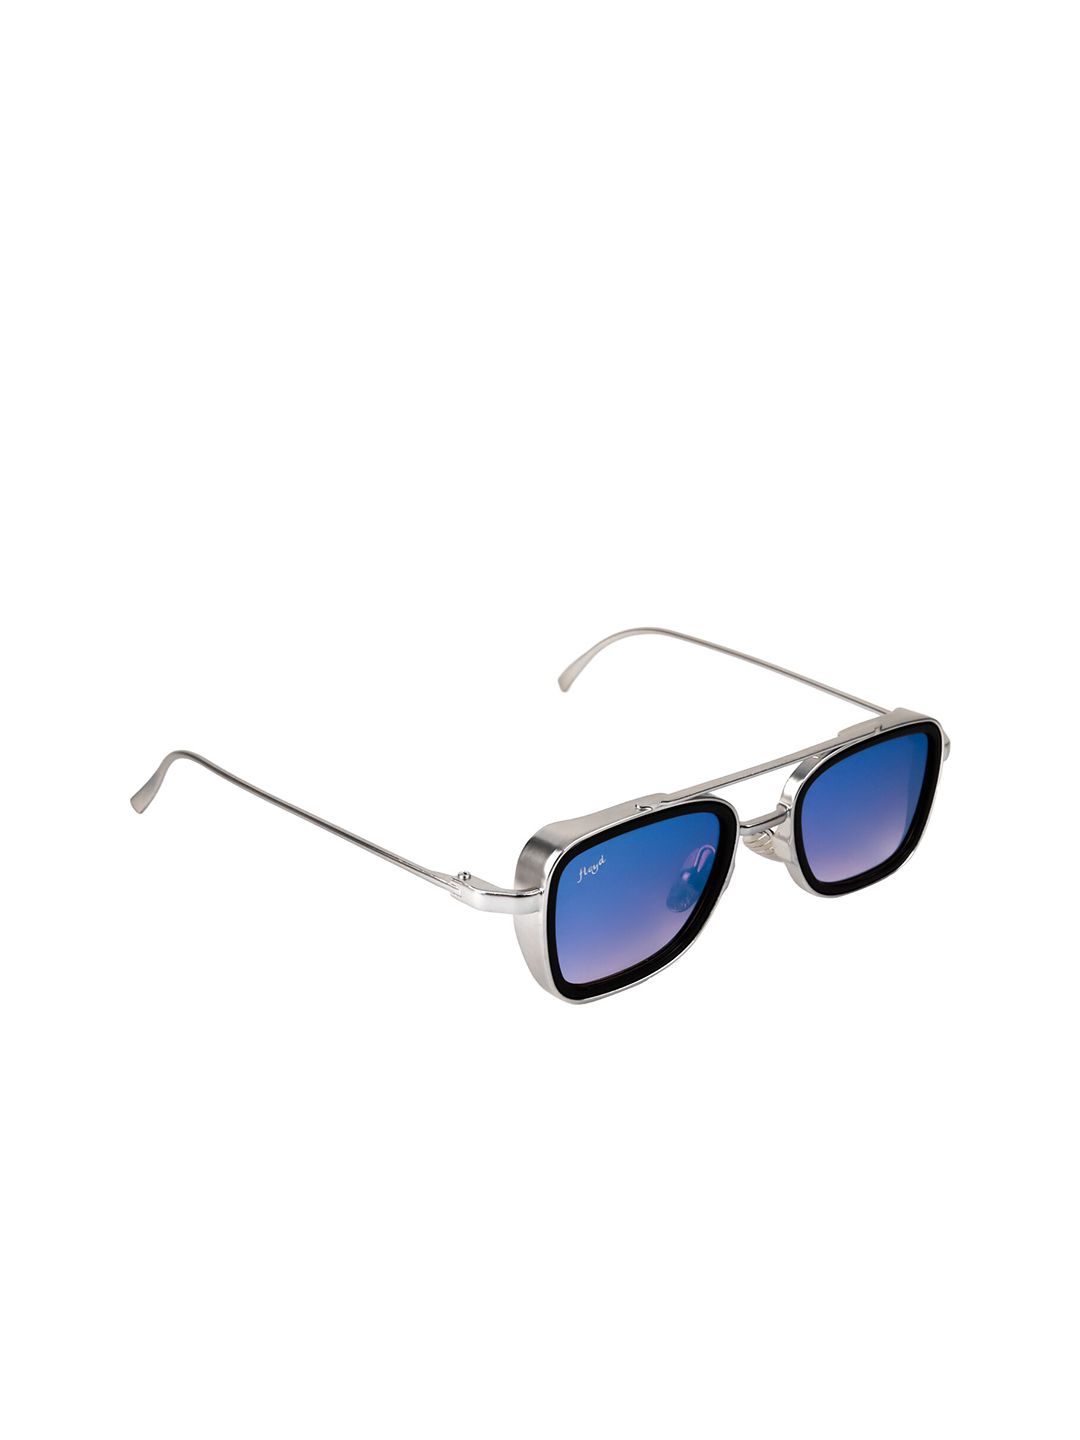 Floyd Unisex Blue Lens & Silver-Toned Rectangle Sunglasses with UV Protected Lens Price in India